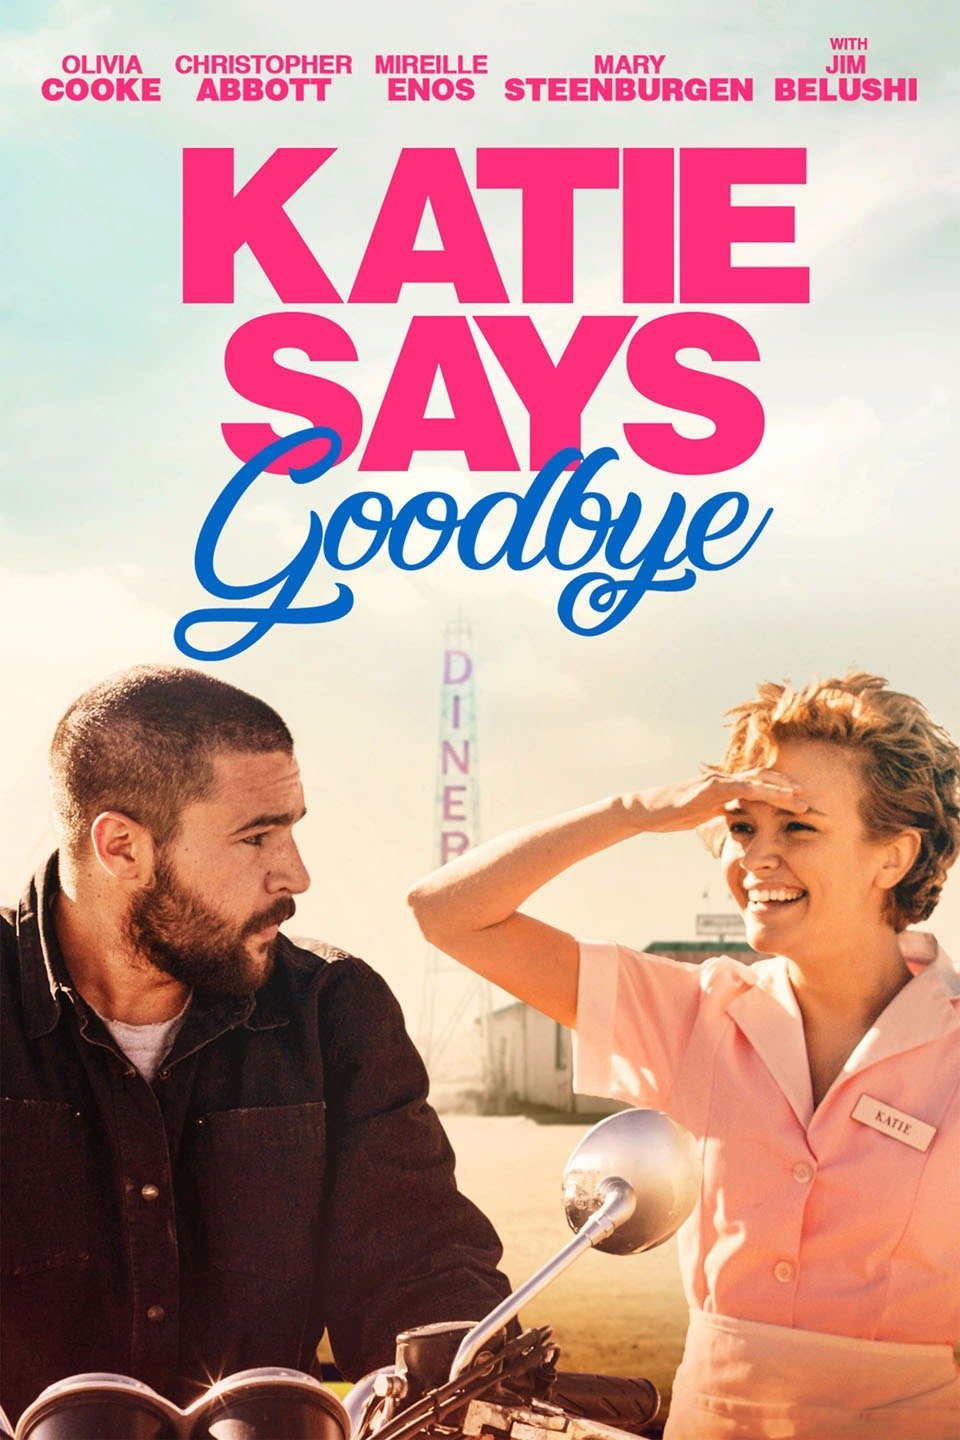 Poster of the movie Katie Says Goodbye